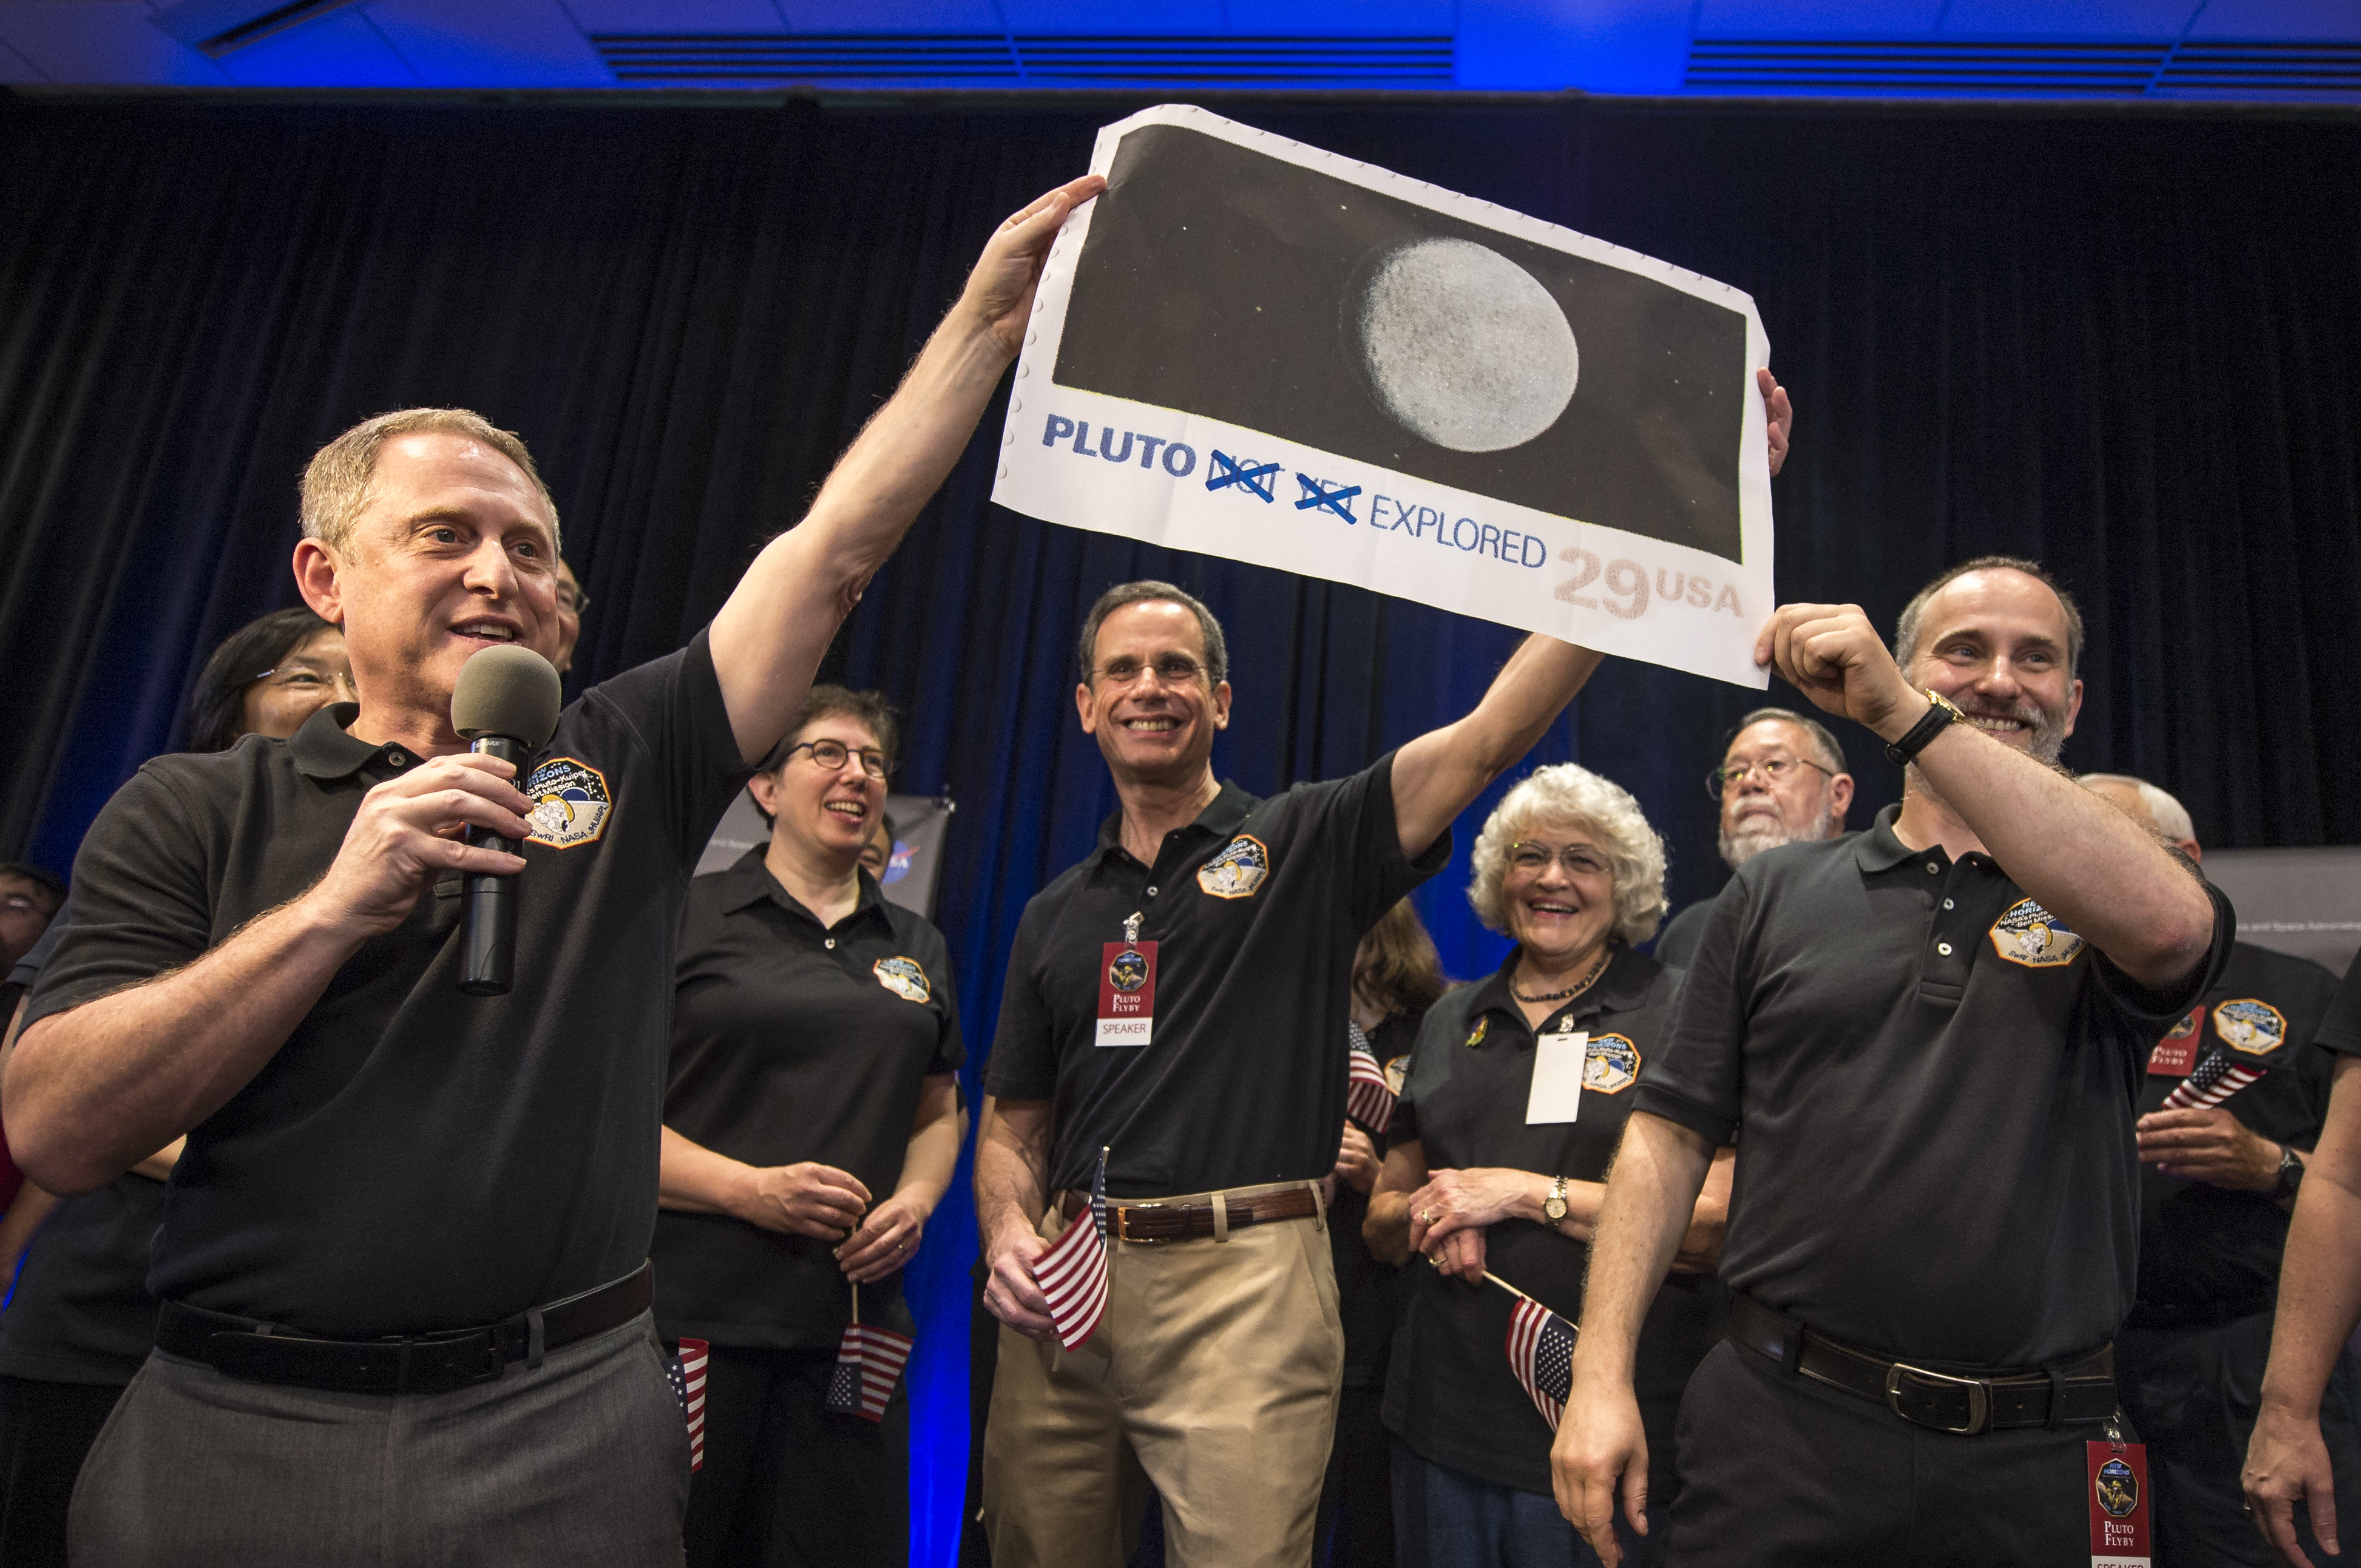 New Horizons Principal Investigator Alan Stern of Southwest Research Institute (SwRI), Boulder, CO., left, Johns Hopkins University Applied Physics Laboratory (APL) Director Ralph Semmel, center, and New Horizons Co-Investigator Will Grundy Lowell Observatory hold a print of an U.S. stamp with their suggested update since the New Horizons spacecraft has explored Pluto, Tuesday, July 14, 2015 at the Johns Hopkins University Applied Physics Laboratory (APL) in Laurel, Maryland. Credit: NASA/Bill Ingalls